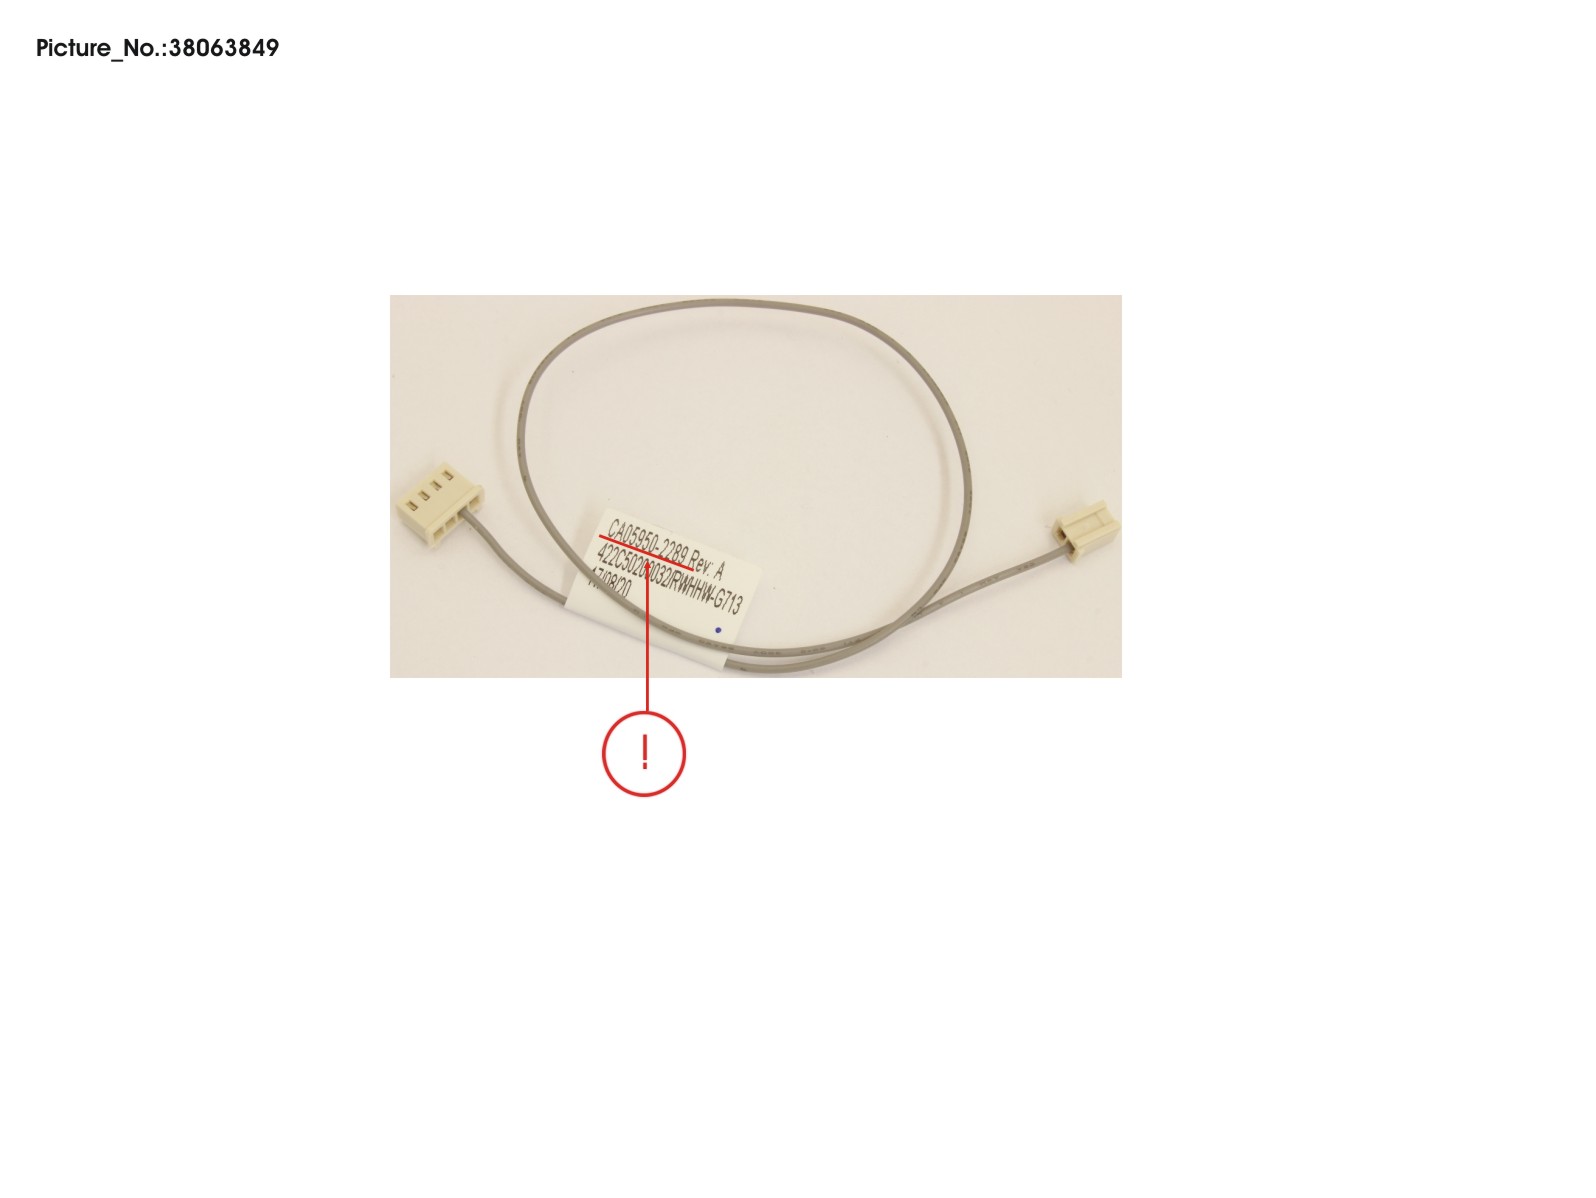 HDD LED CABLE_320 FOR COUGAR6/LYNX5